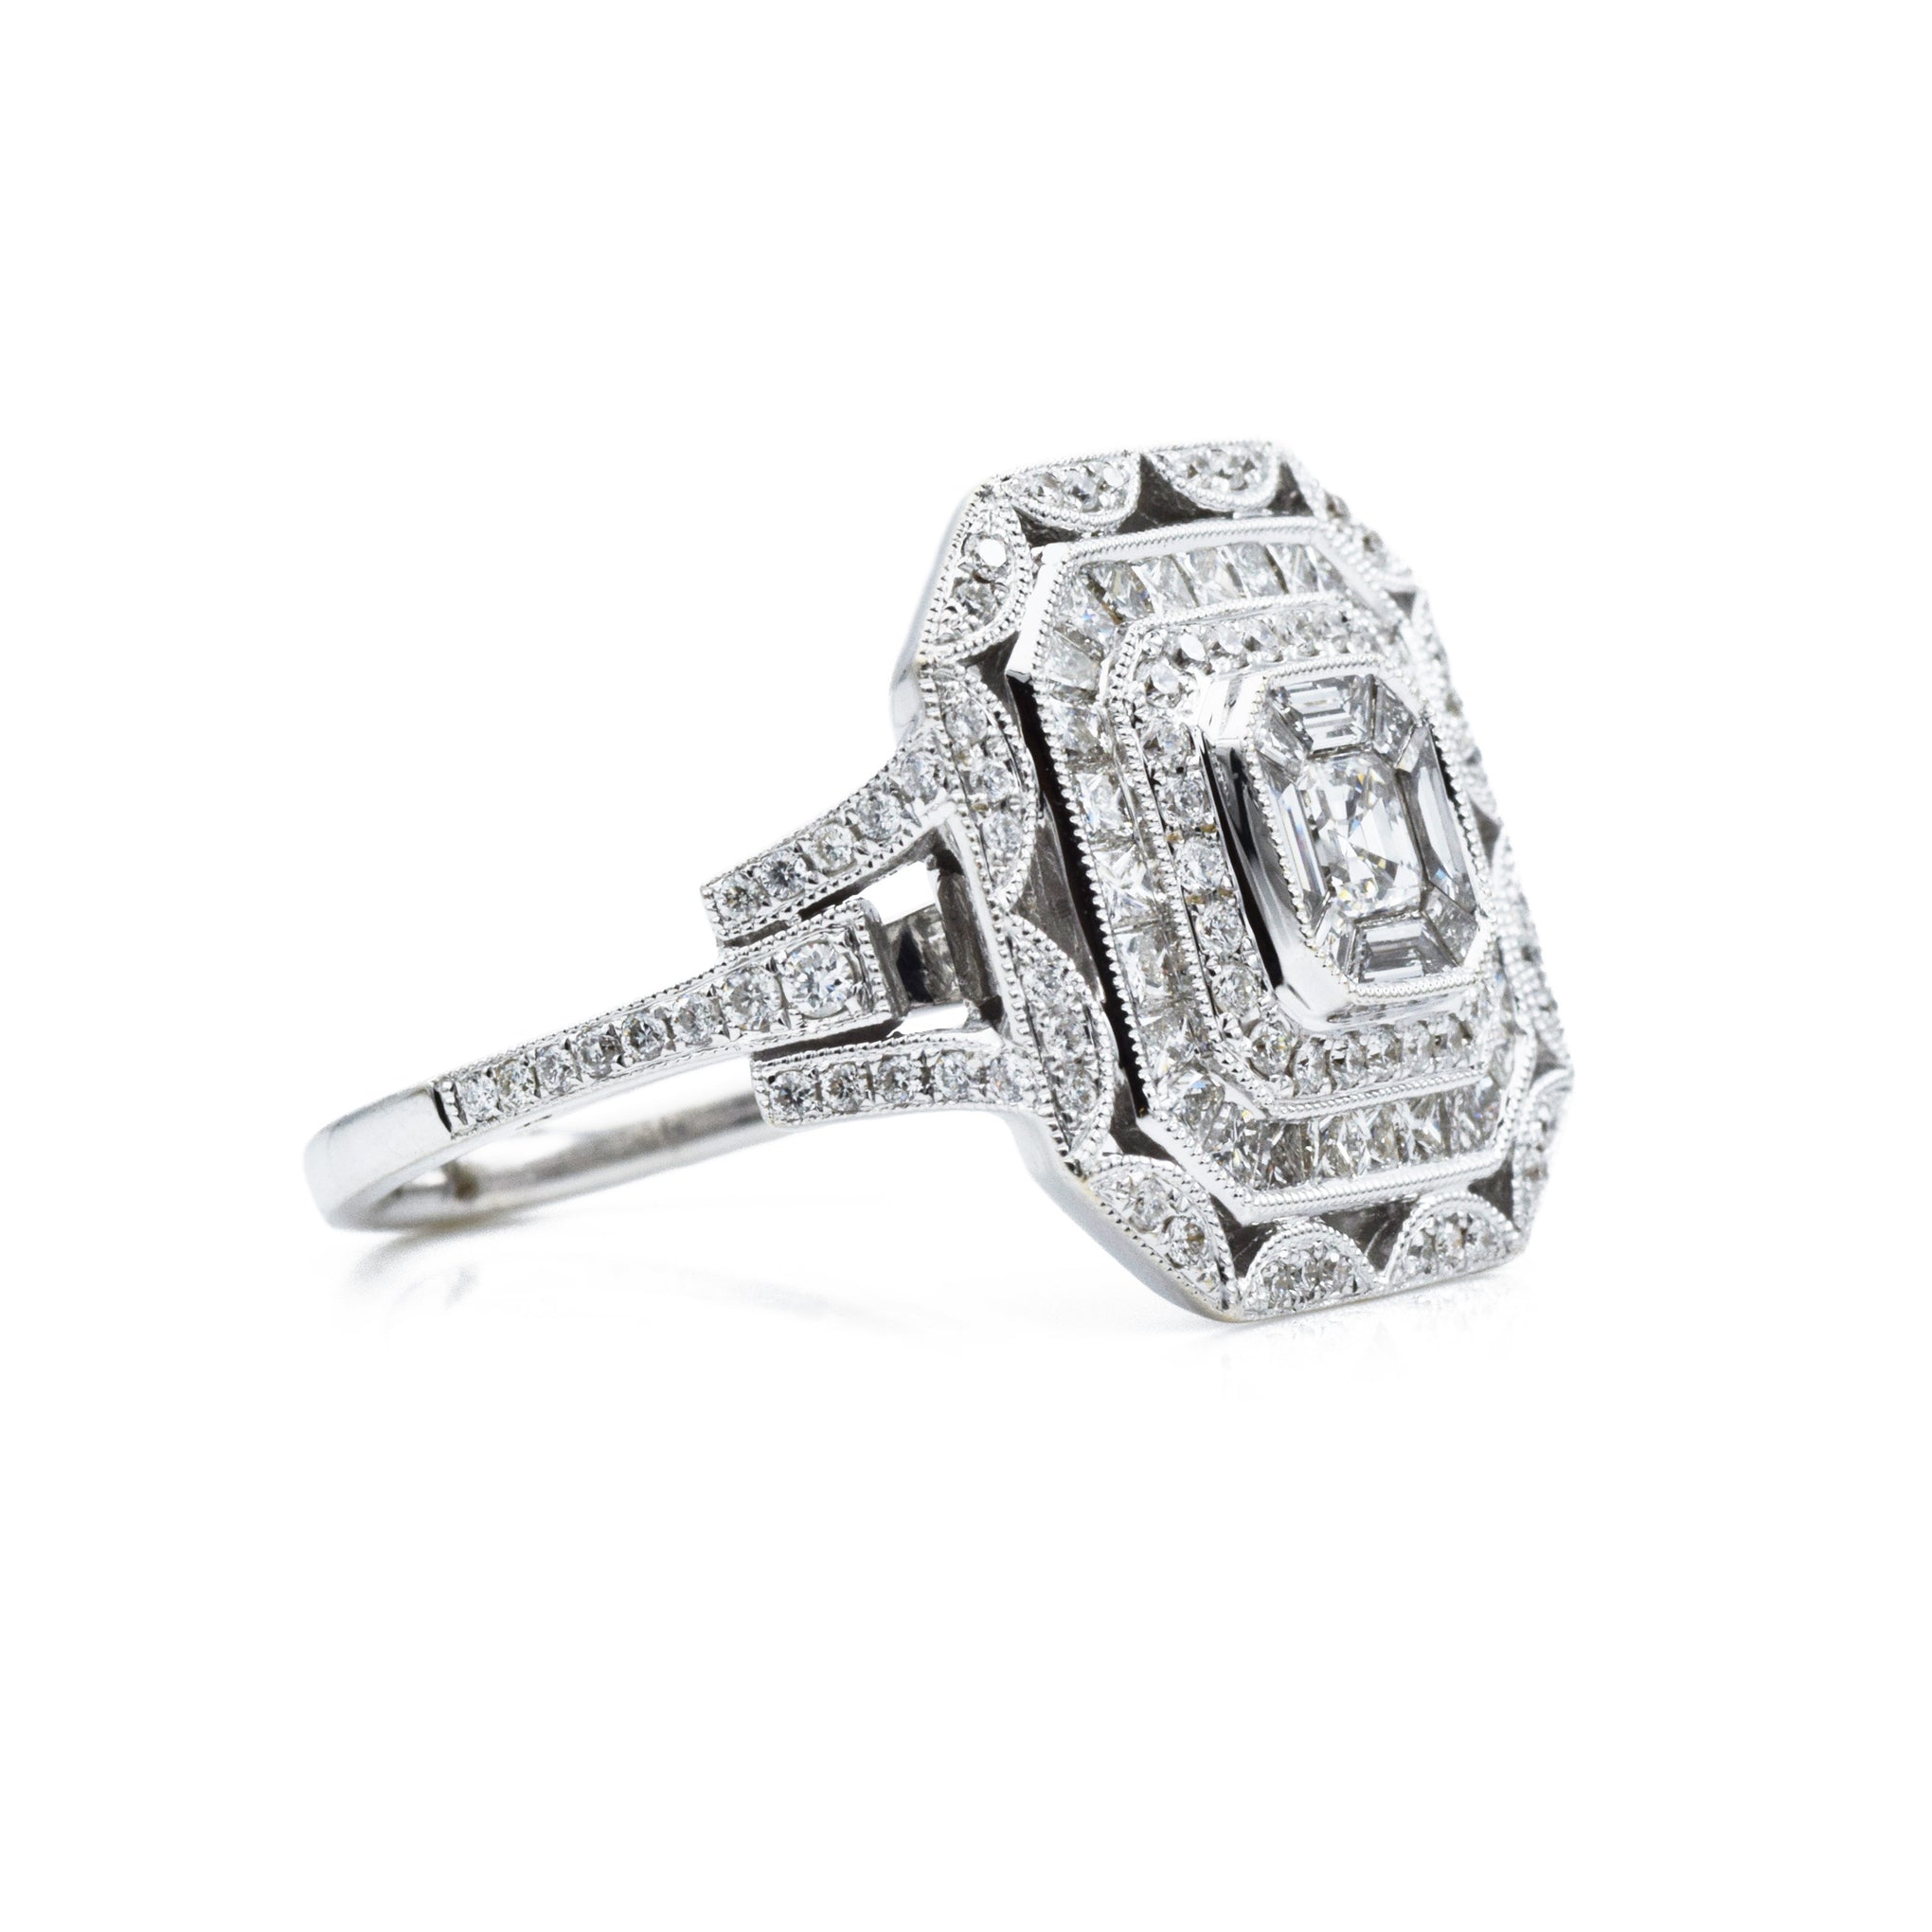 18kt White Gold and 2.0ct Certified Diamond Ring